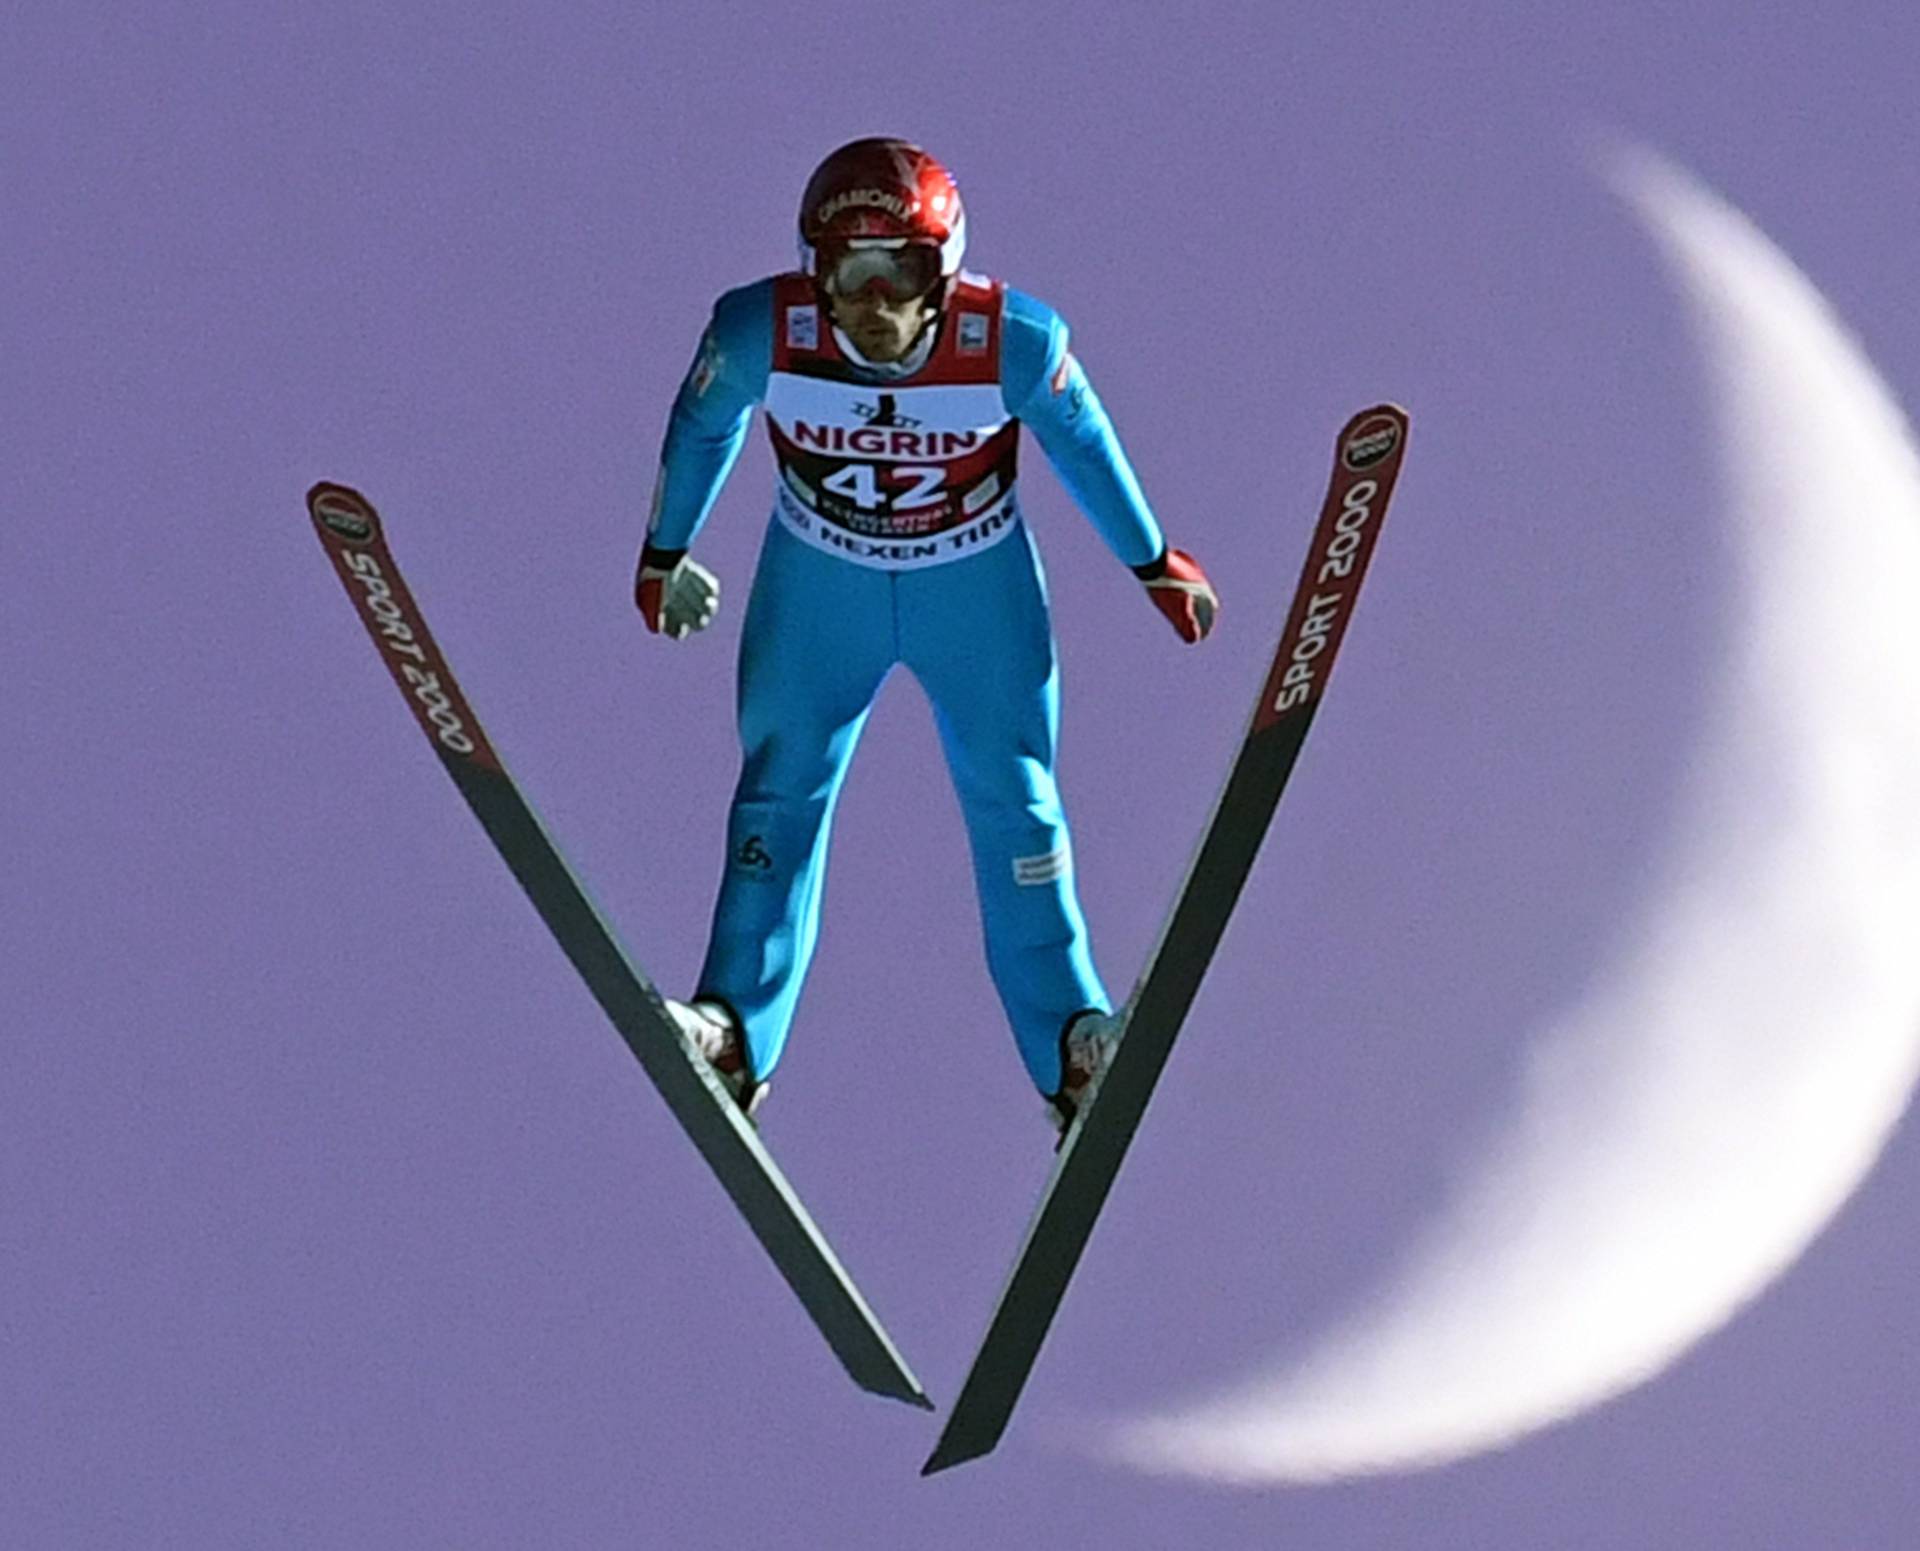 Ski Jumping World Cup in Klingenthal